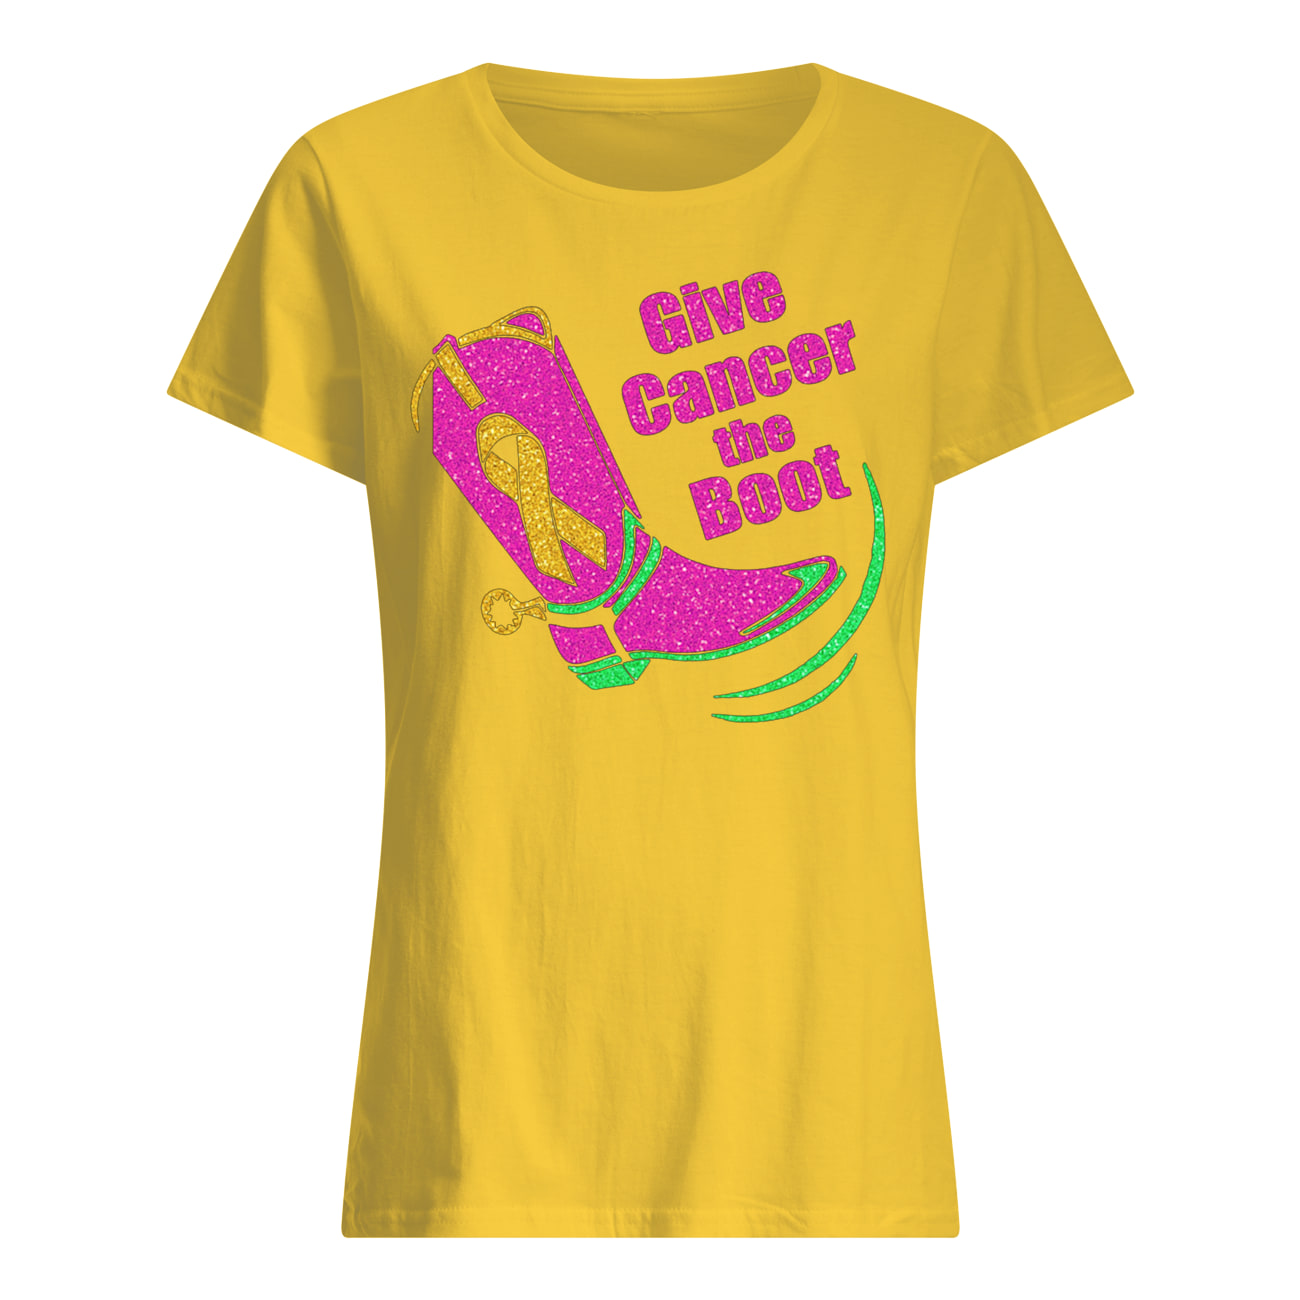 Give cancer the boot breast cancer awareness womens shirt